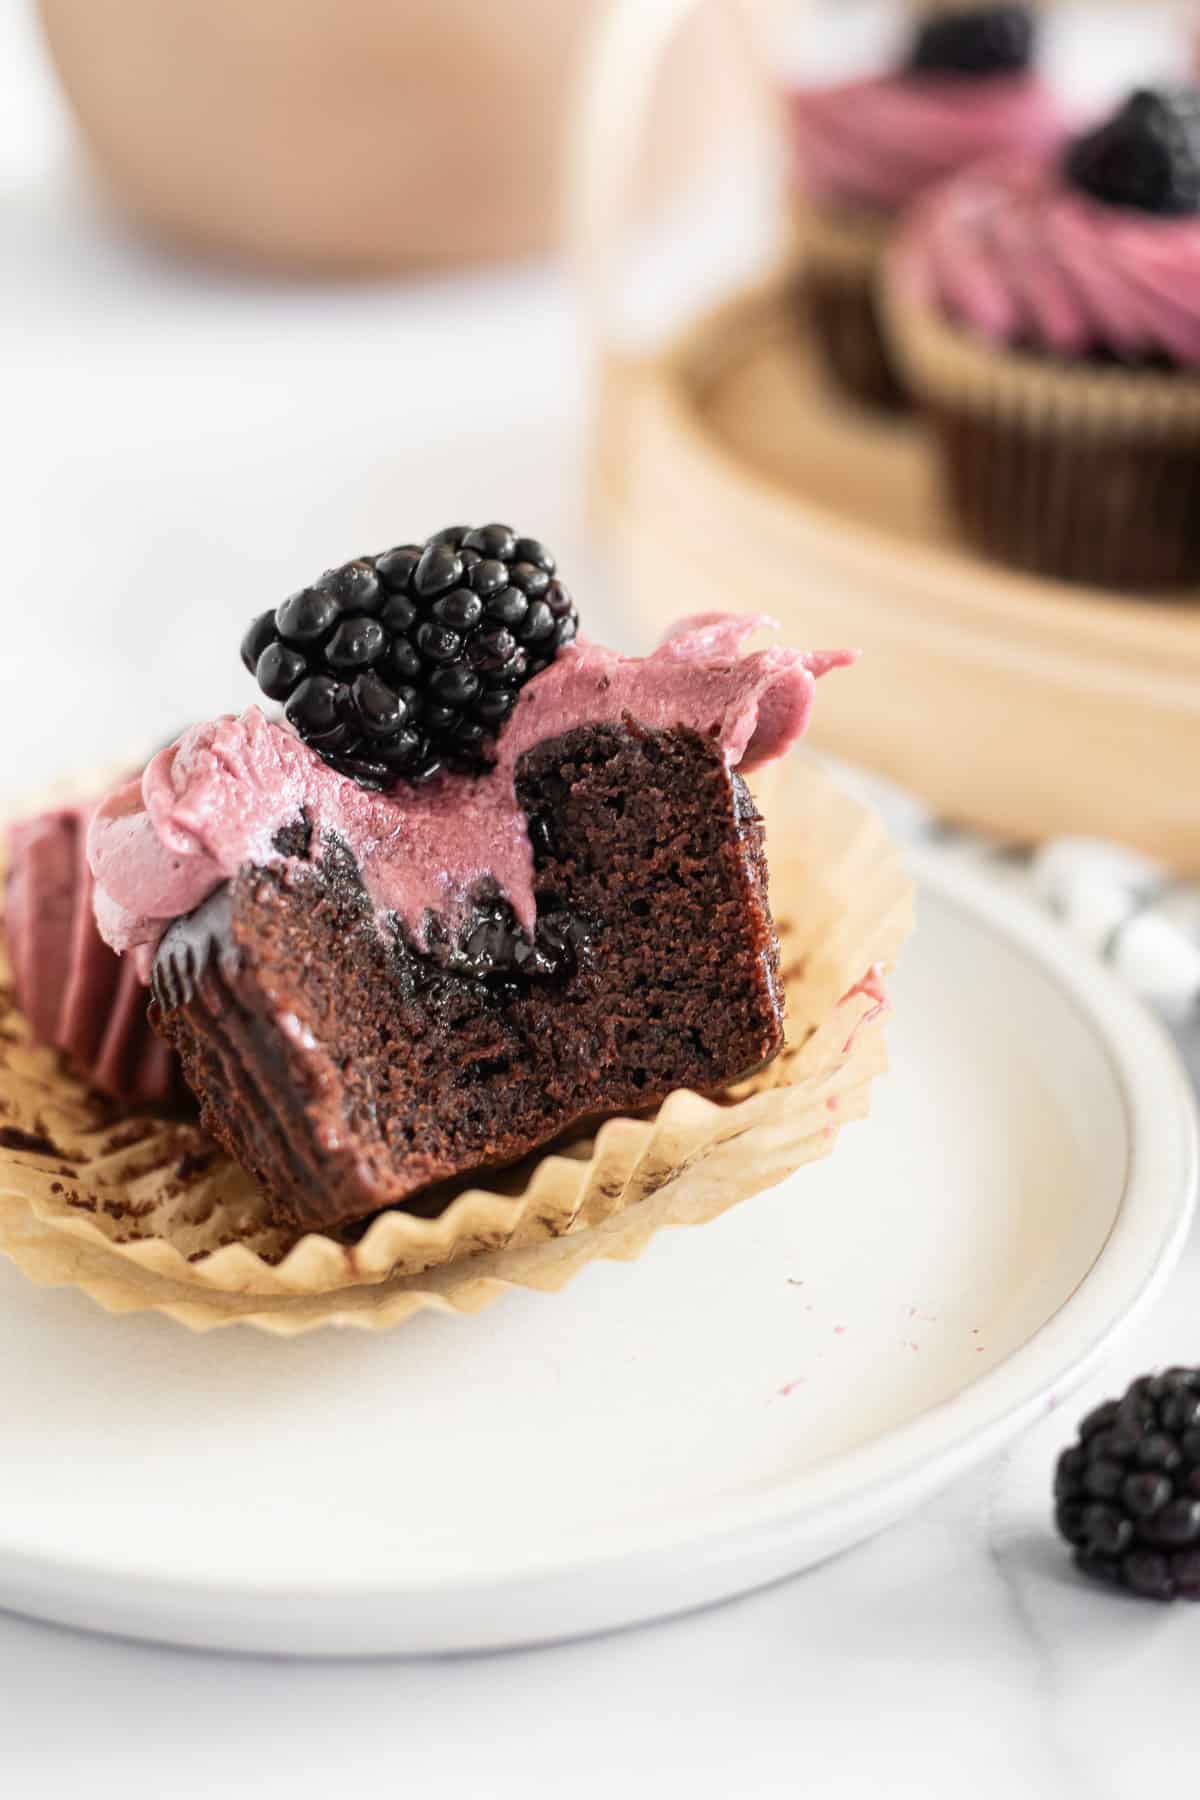 a chocolate cupcake with blackberries on a plate with a bite taken out of it.